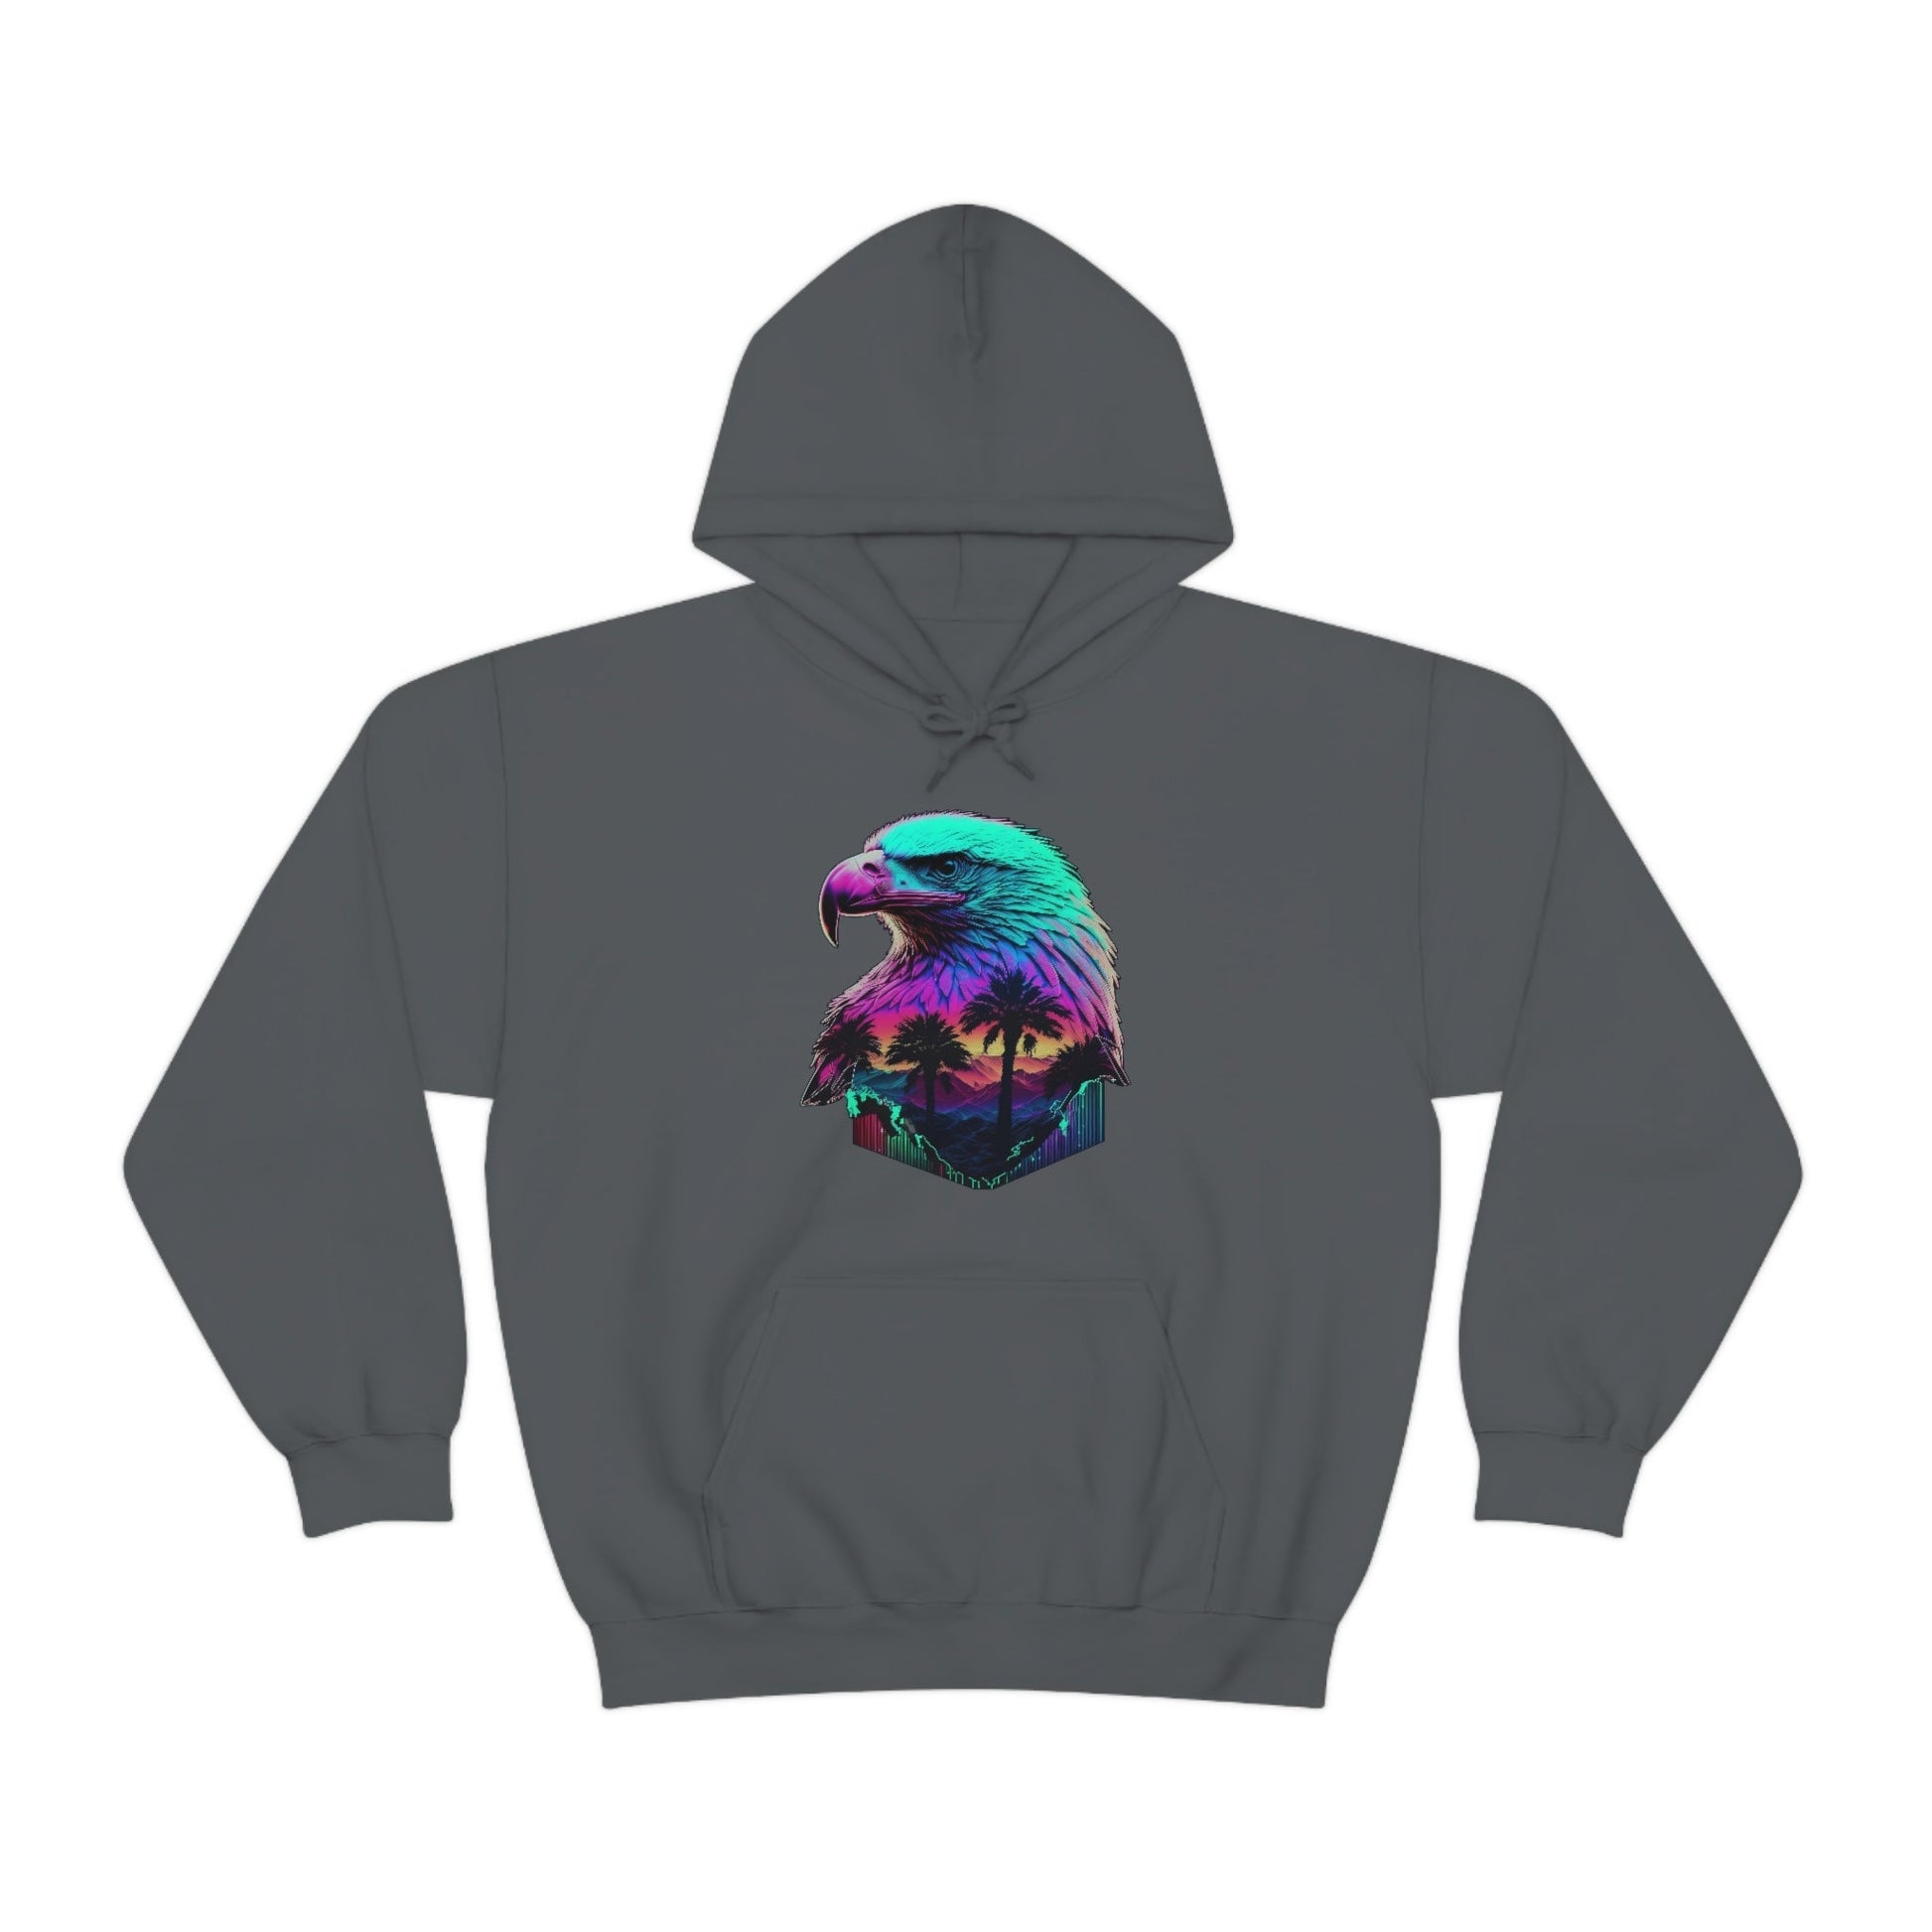 Womens and Mens Patriotic Hoodies - Land of the Vapor, Home of the Wave - Bind on Equip - 10774479043140512164